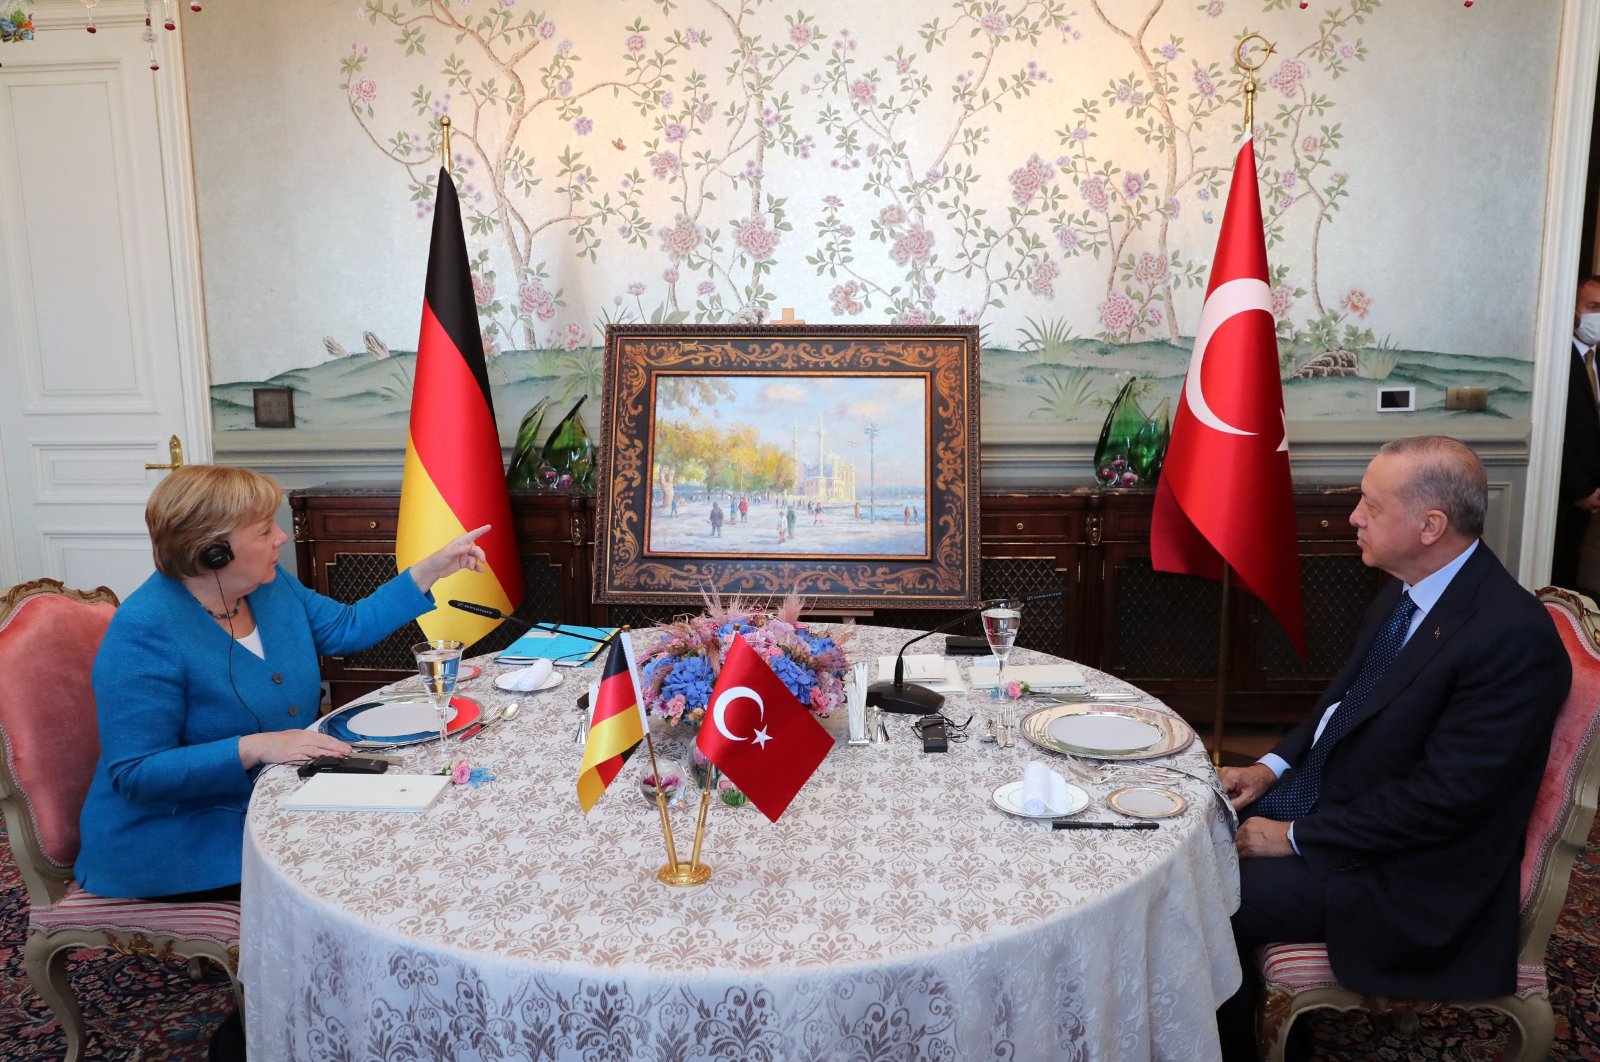 Turkish President Recep Tayyip Erdoğan (R) meeting with German Chancellor Angela Merkel (L) at the Huber mansion in Istanbul, Turkey, Oct. 16, 2021. (Photo by the Turkish Presidential Press via AFP)